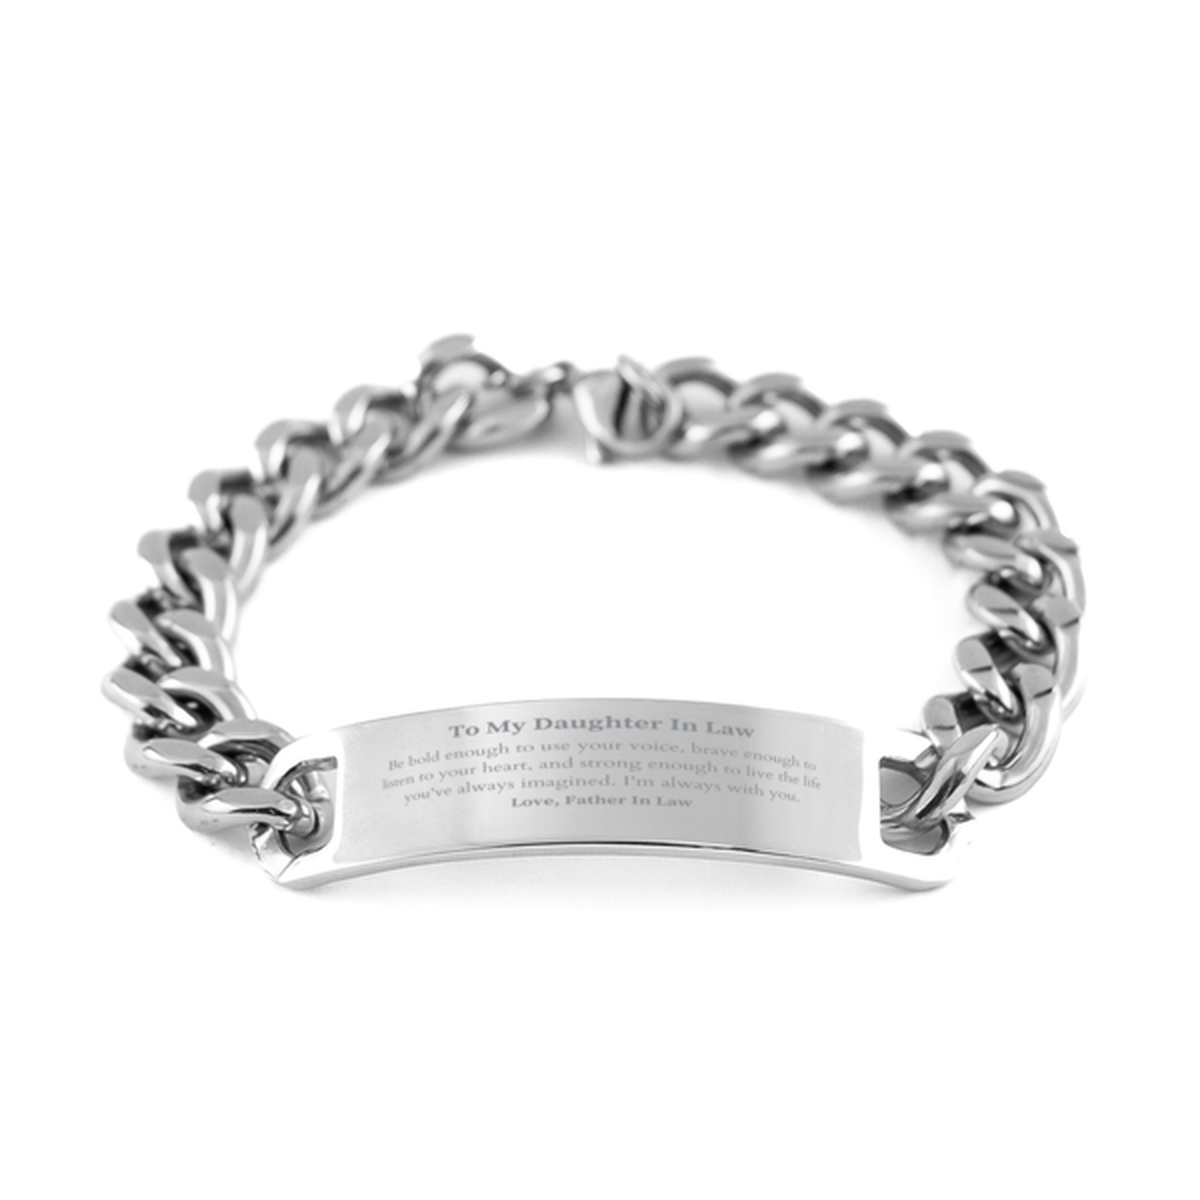 Keepsake Daughter In Law Cuban Chain Stainless Steel Bracelet Gift Idea Graduation Christmas Birthday Daughter In Law from Father In Law, Daughter In Law Be bold enough to use your voice, brave enough to listen to your heart. Love, Father In Law